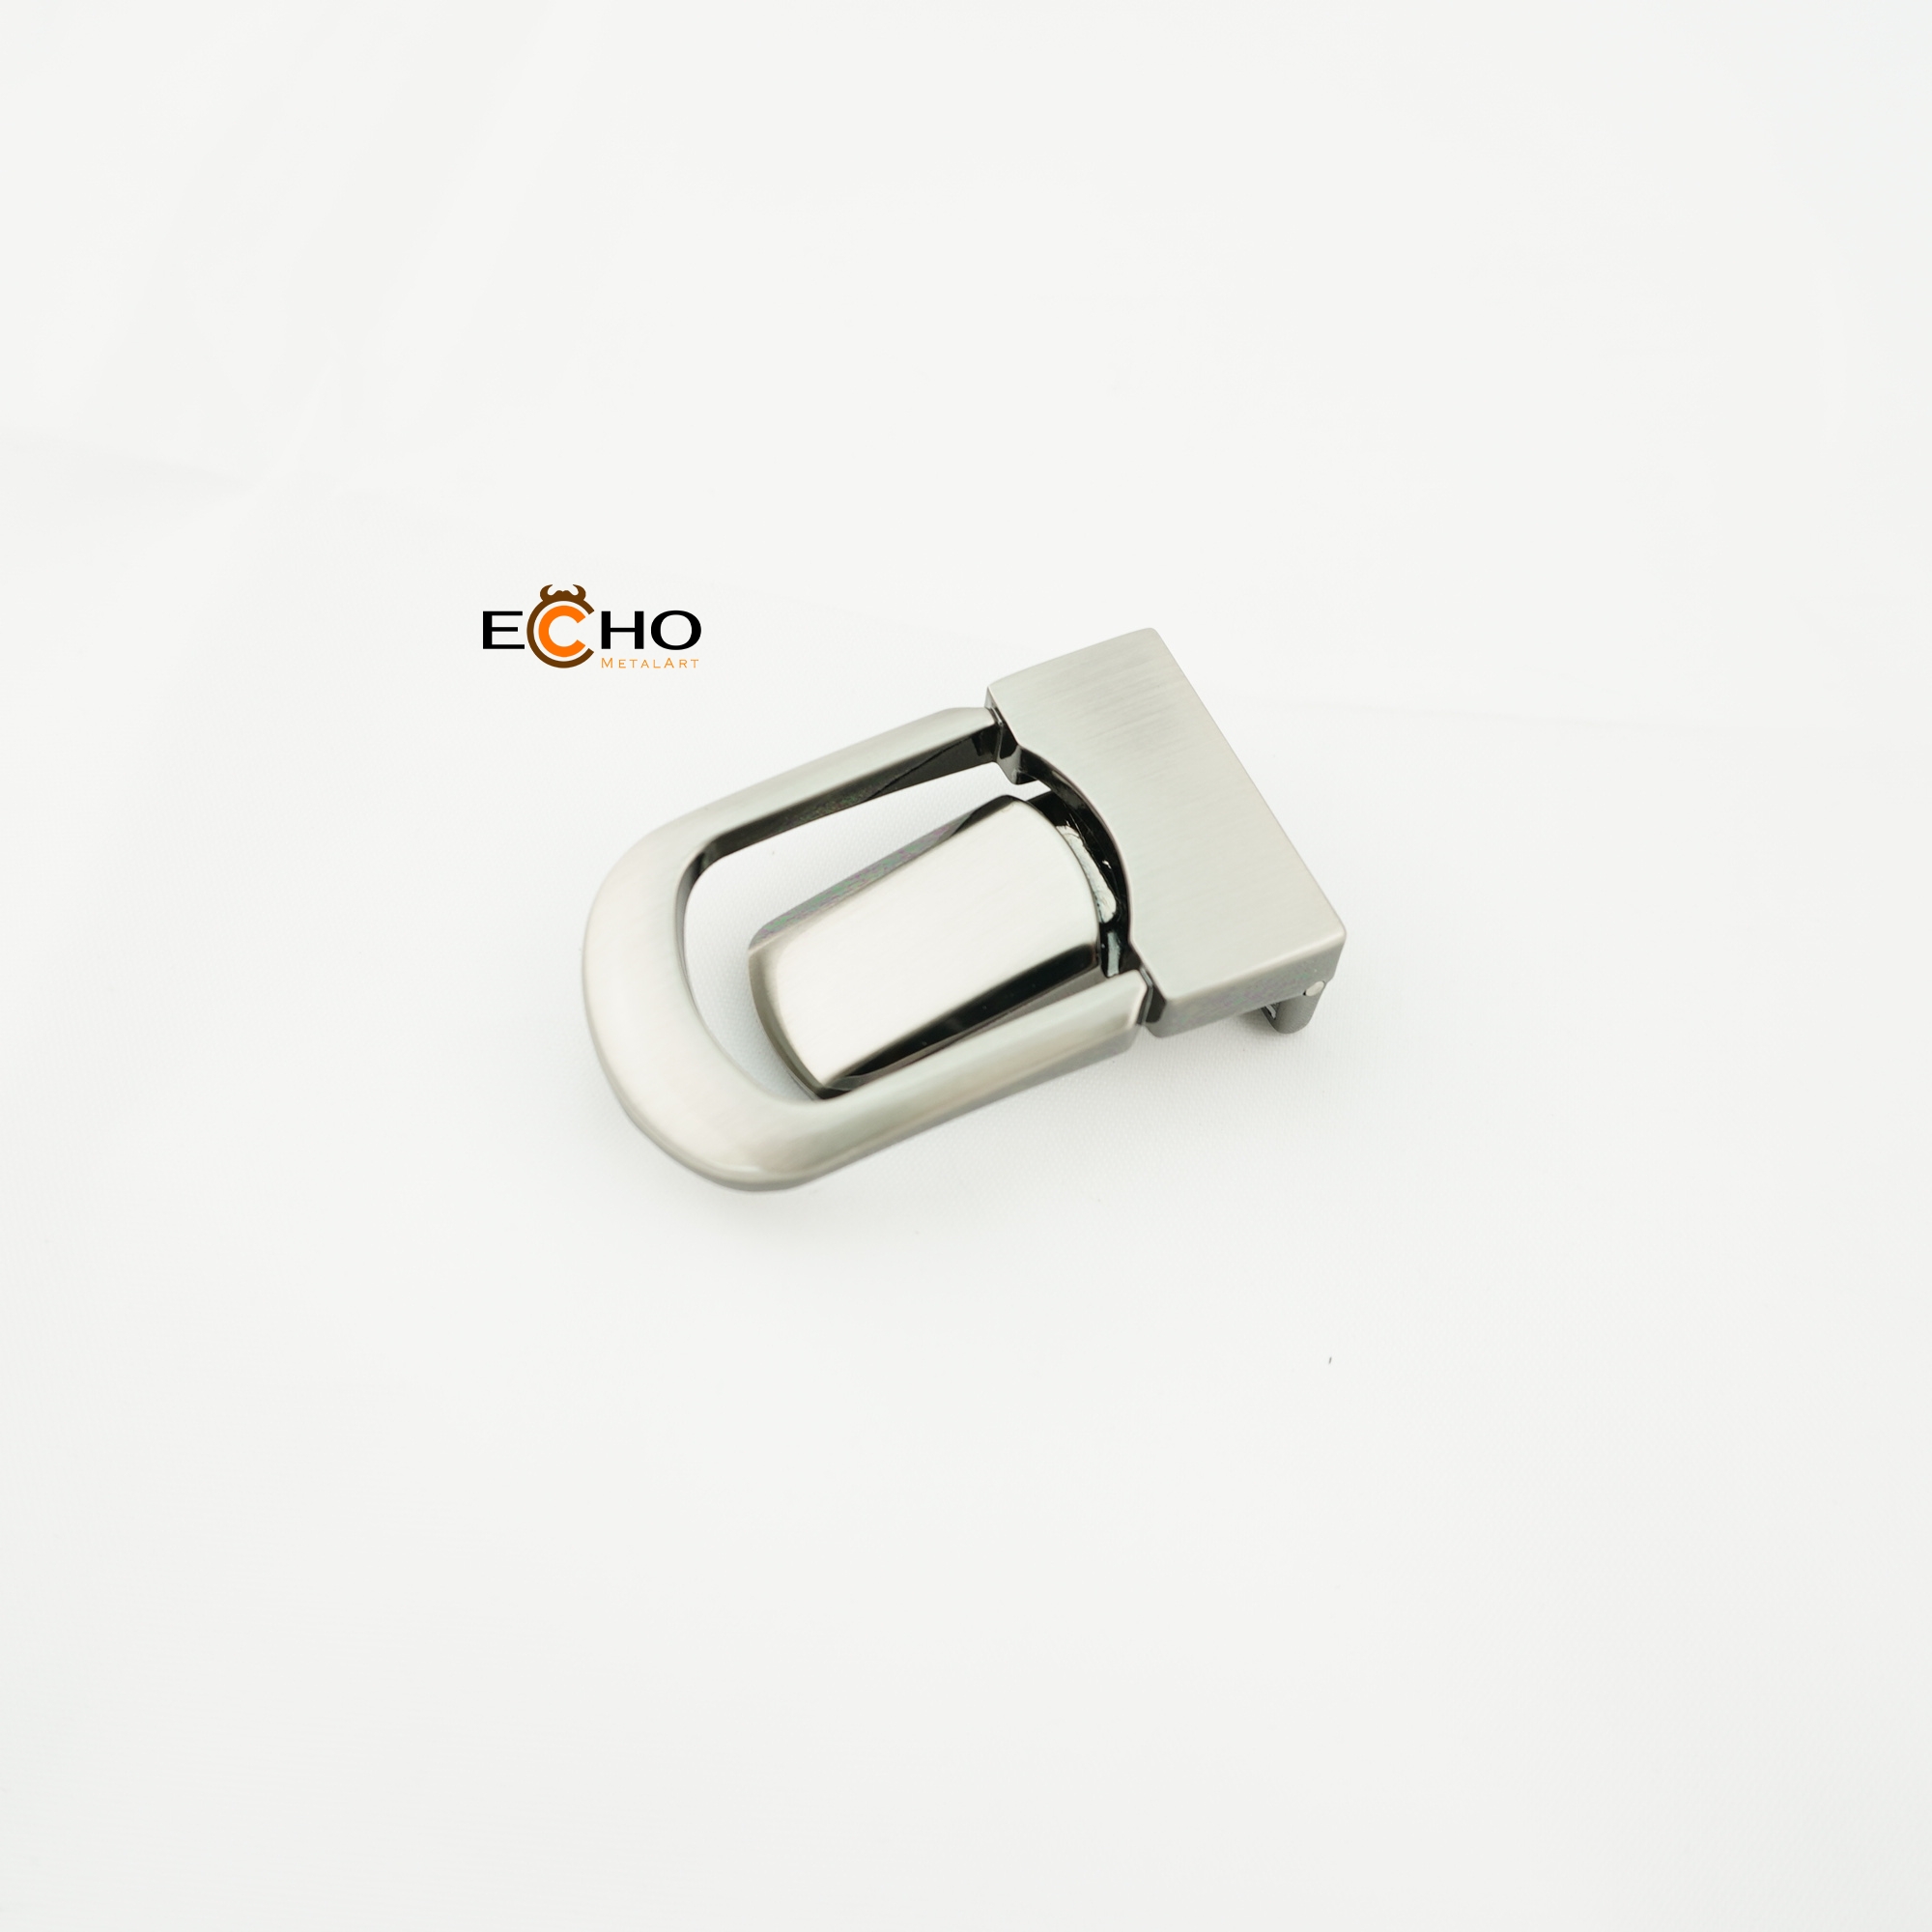 Inner size 30 mm clamp on belt buckle